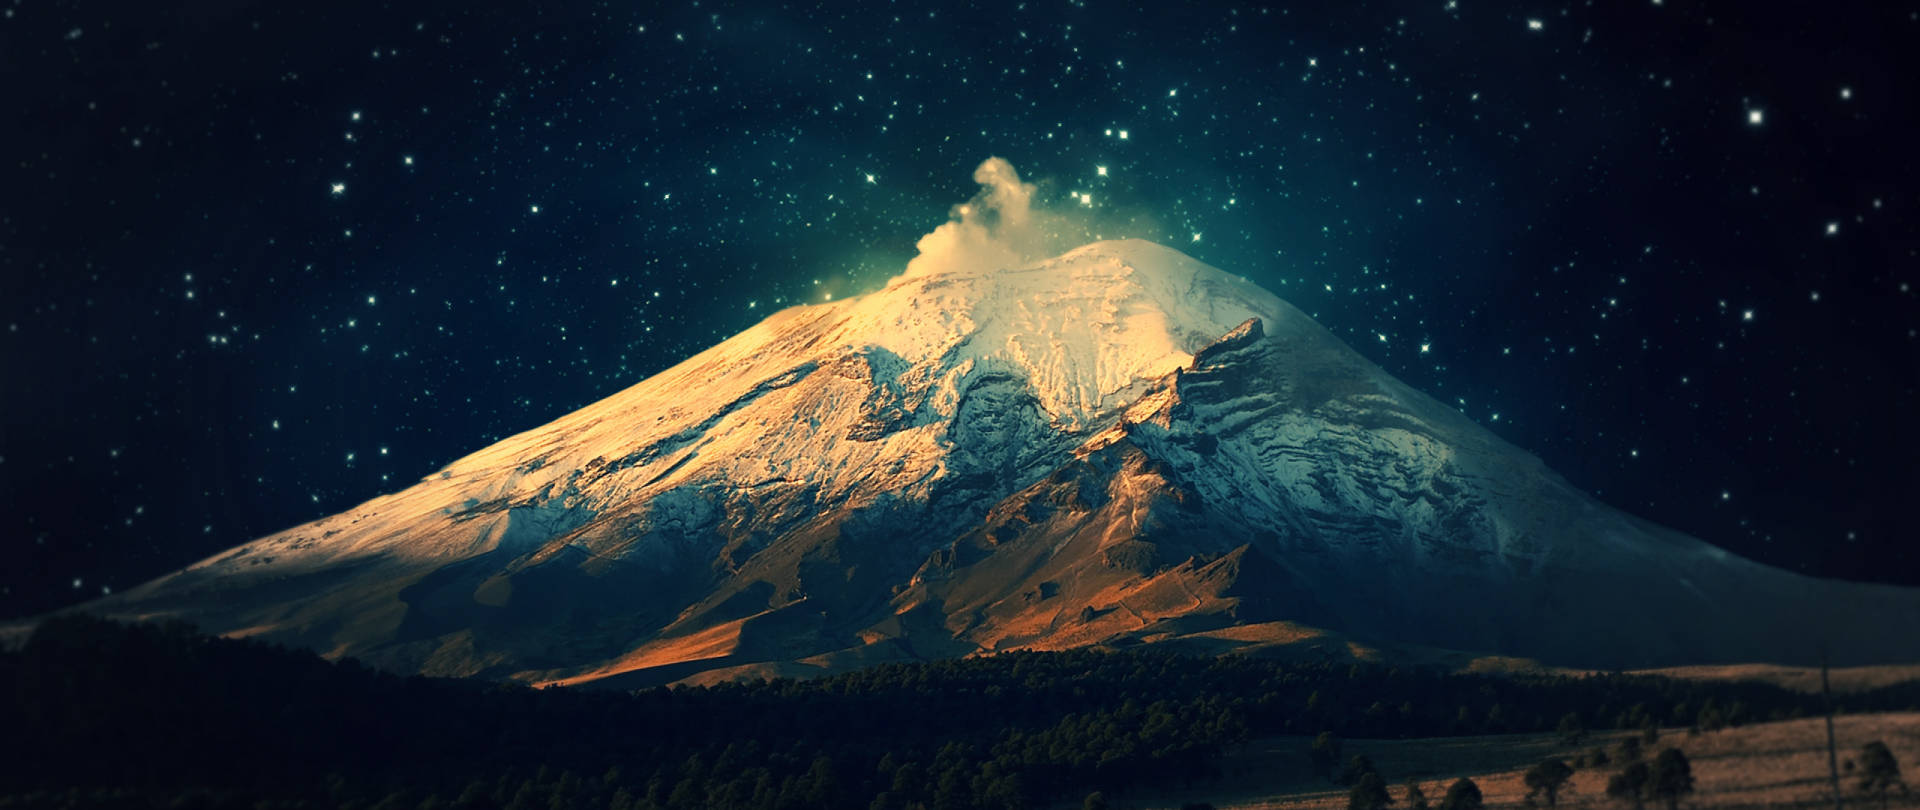 Enjoying the night view of the magnificent mountain Wallpaper